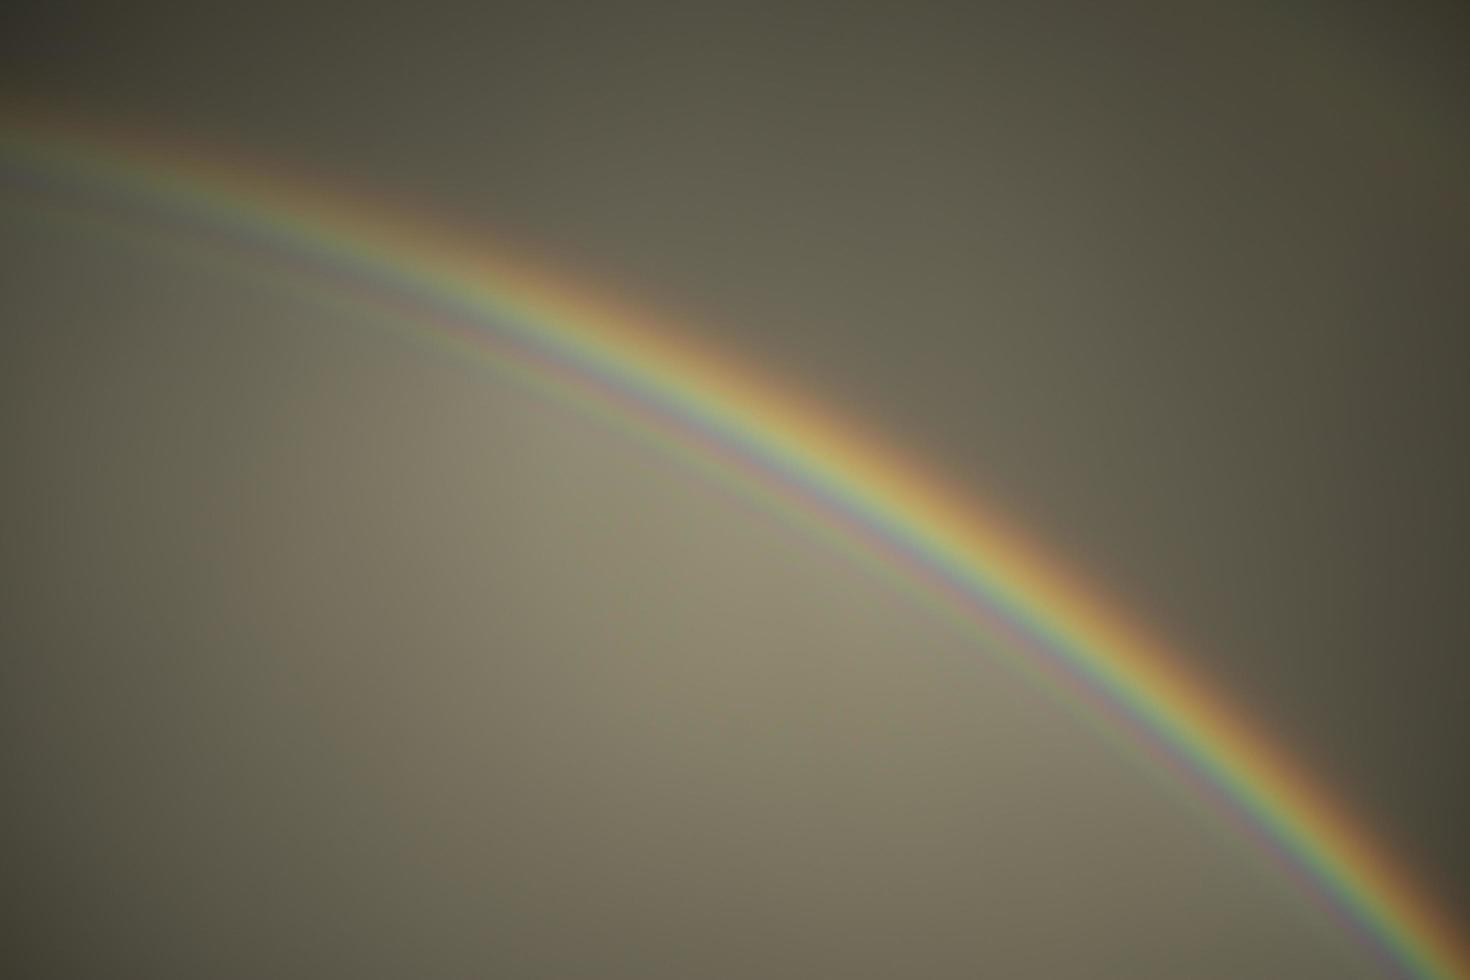 Rainbow in sky. Refraction of light. Weather after rain. Bright arc of different colors. photo